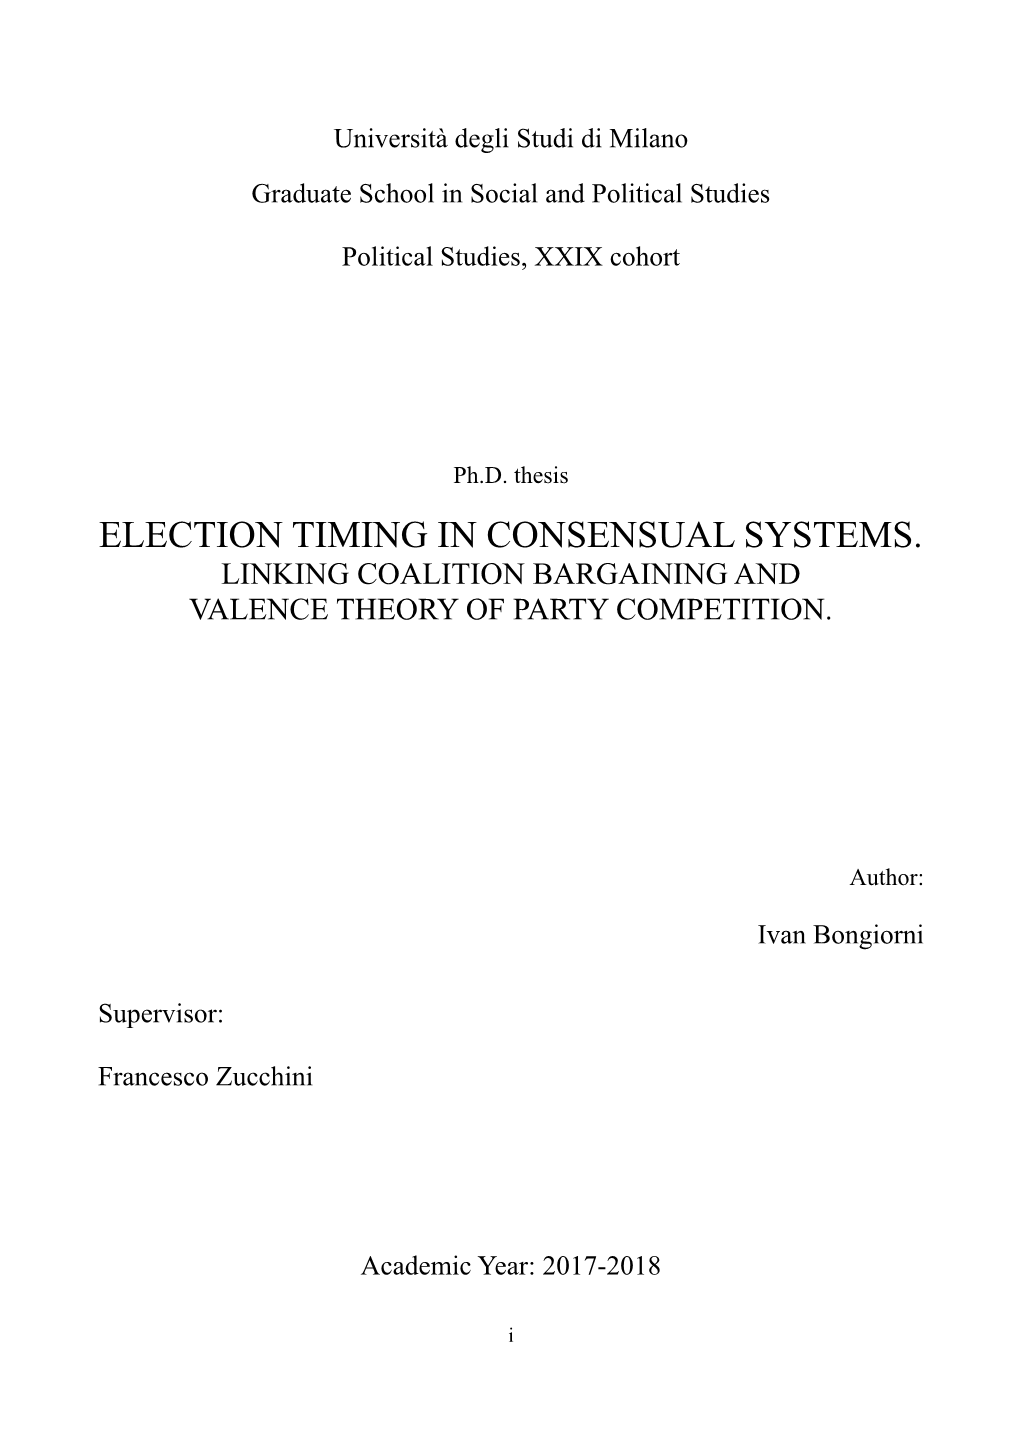 Election Timing in Consensual Systems. Linking Coalition Bargaining and Valence Theory of Party Competition